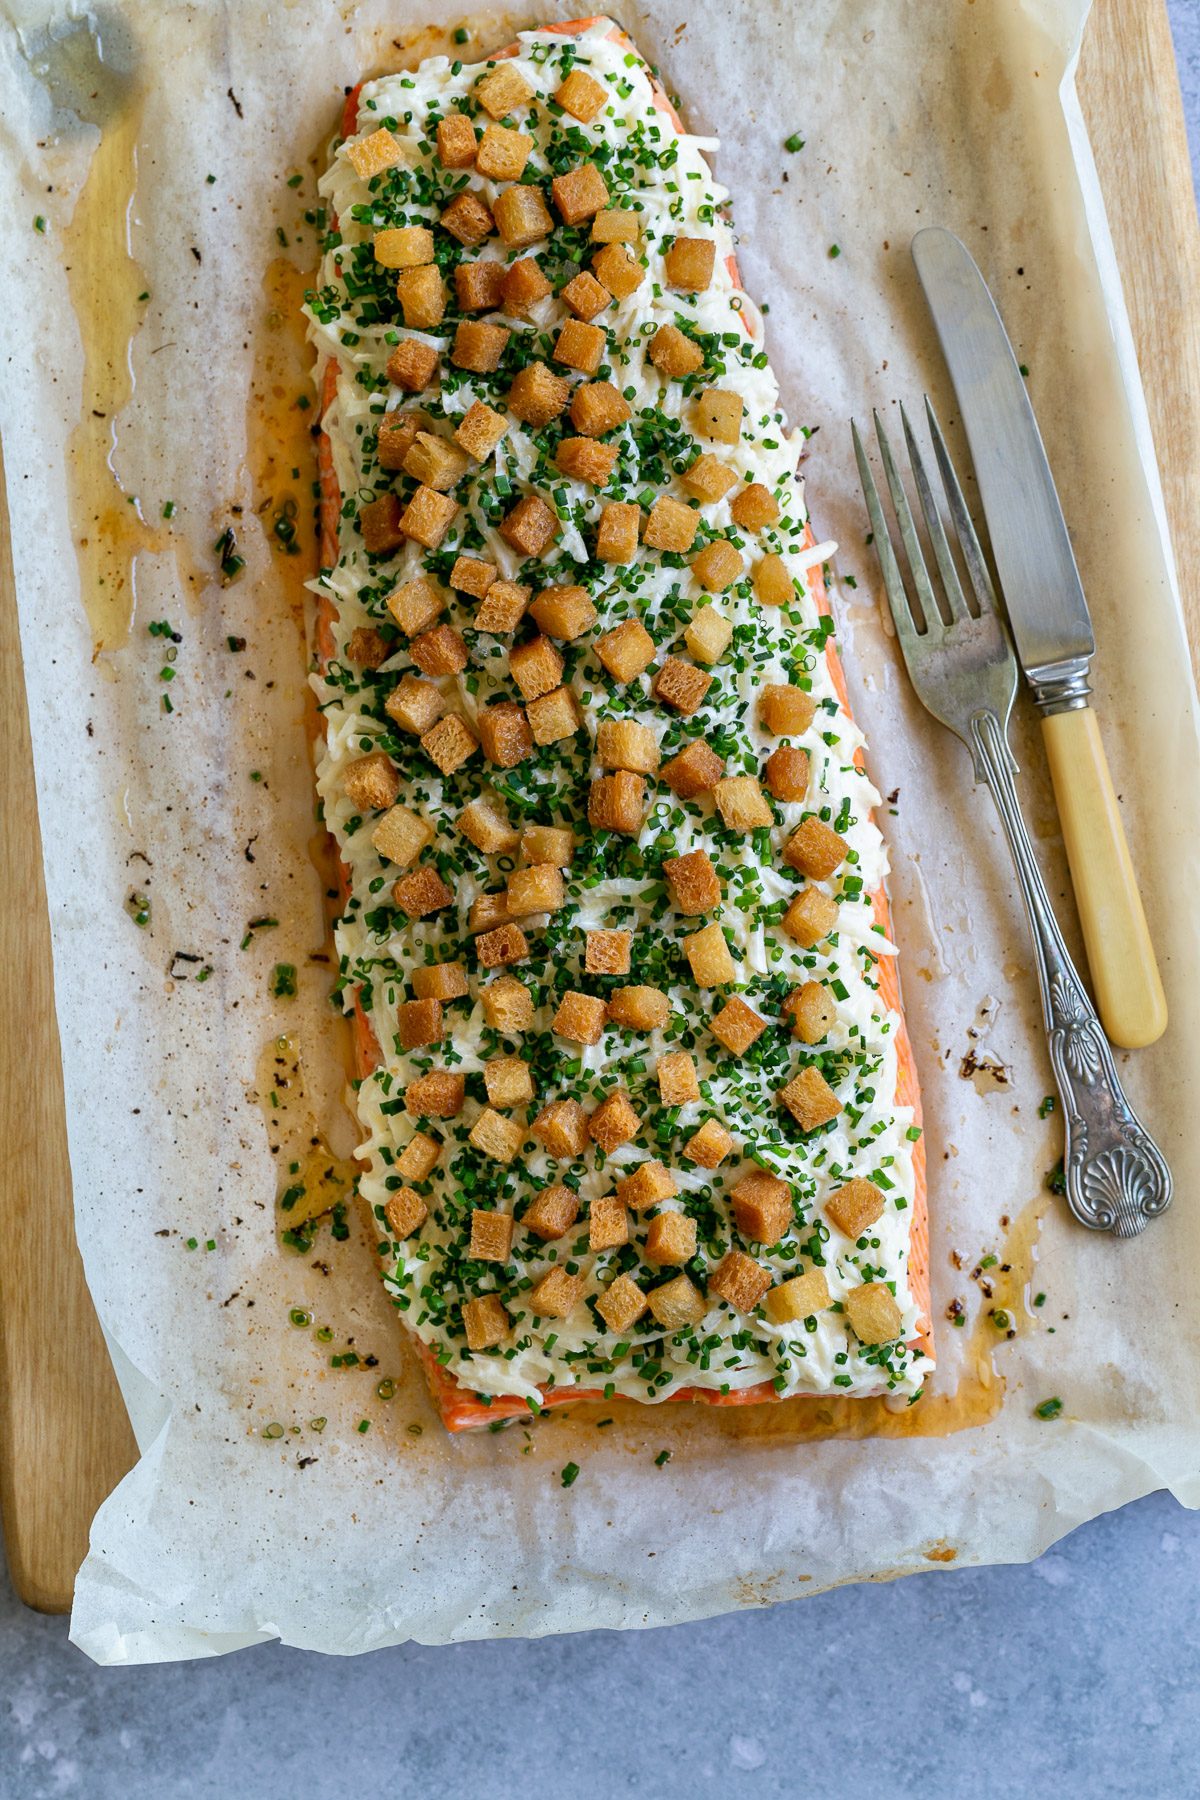 Oven Baked Trout fillet with Celeriac Remoulade